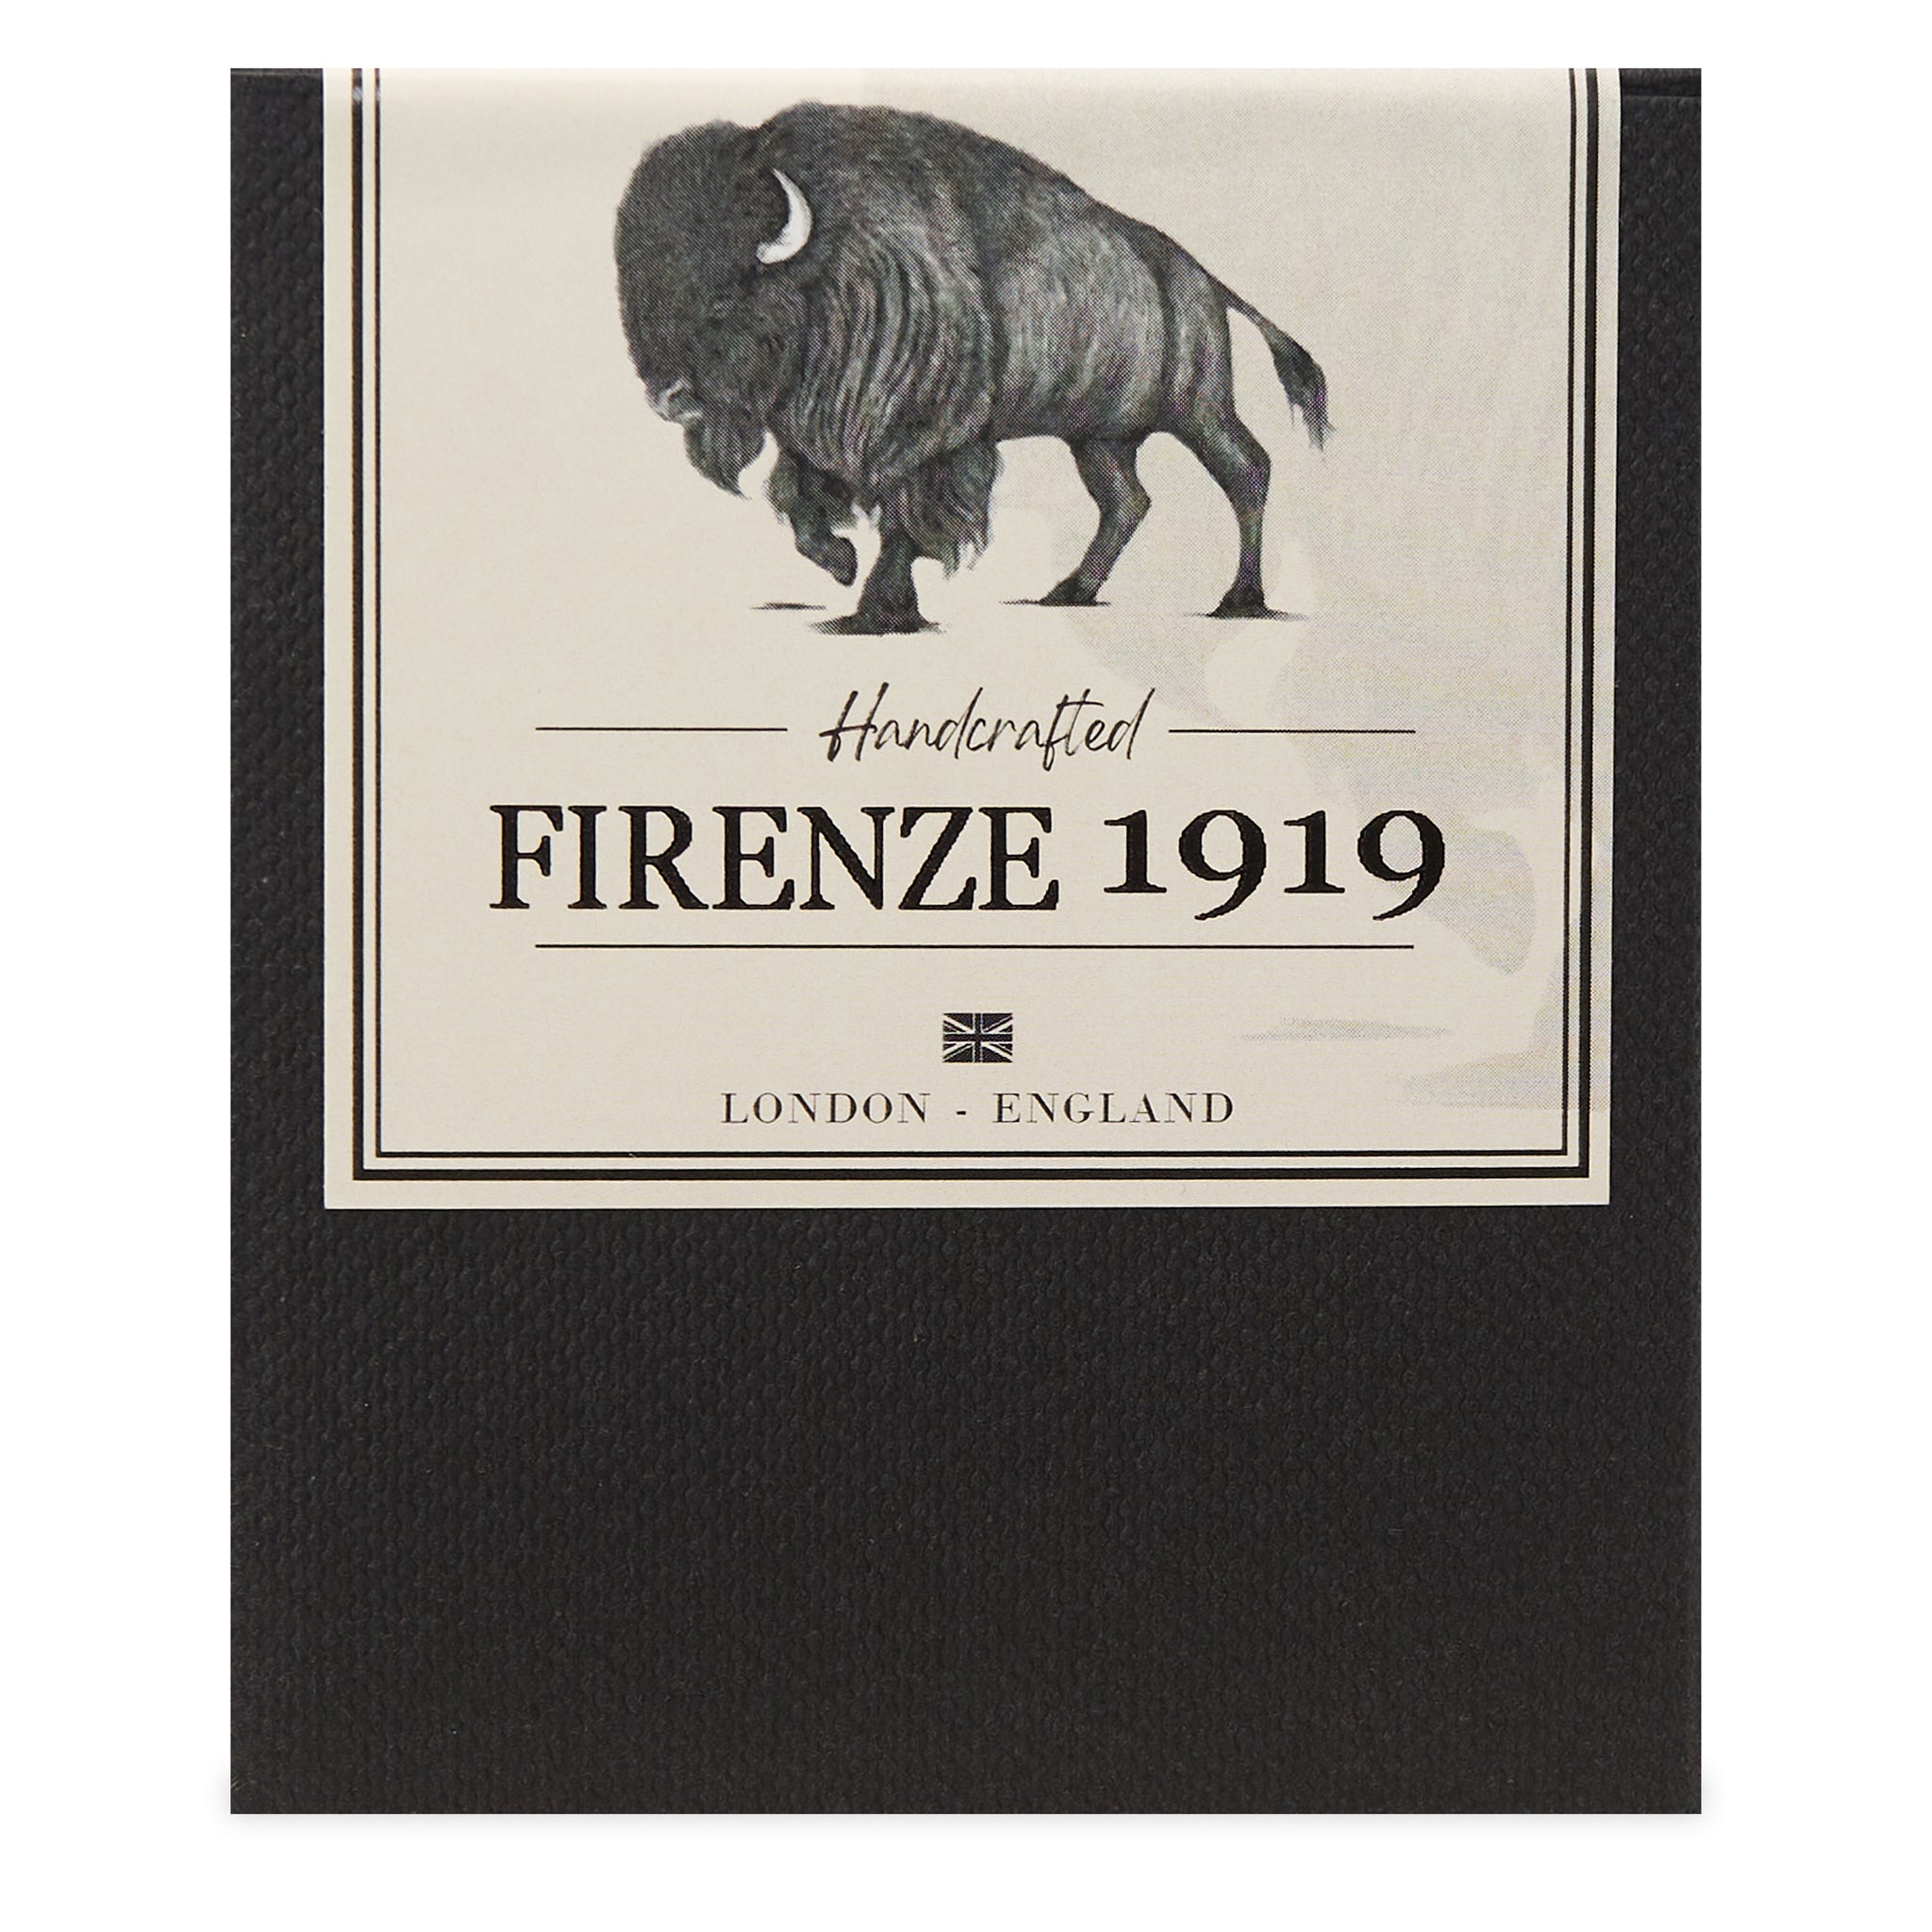 Firenze 1919 Candle